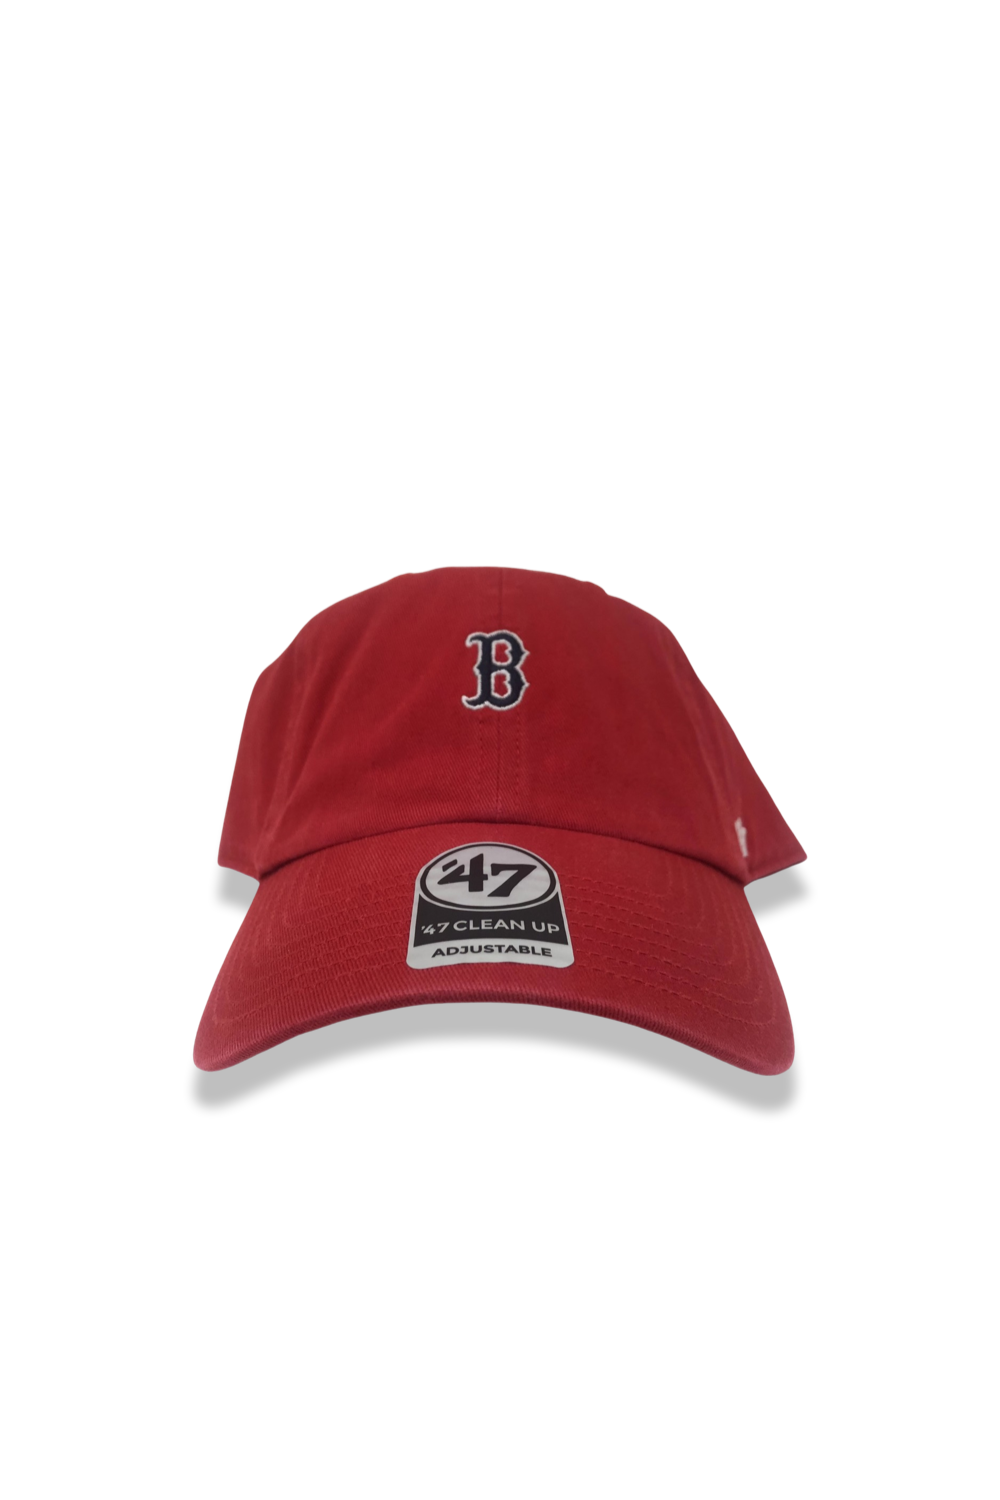 Boston Red Sox Red Base Runner 47 Clean up